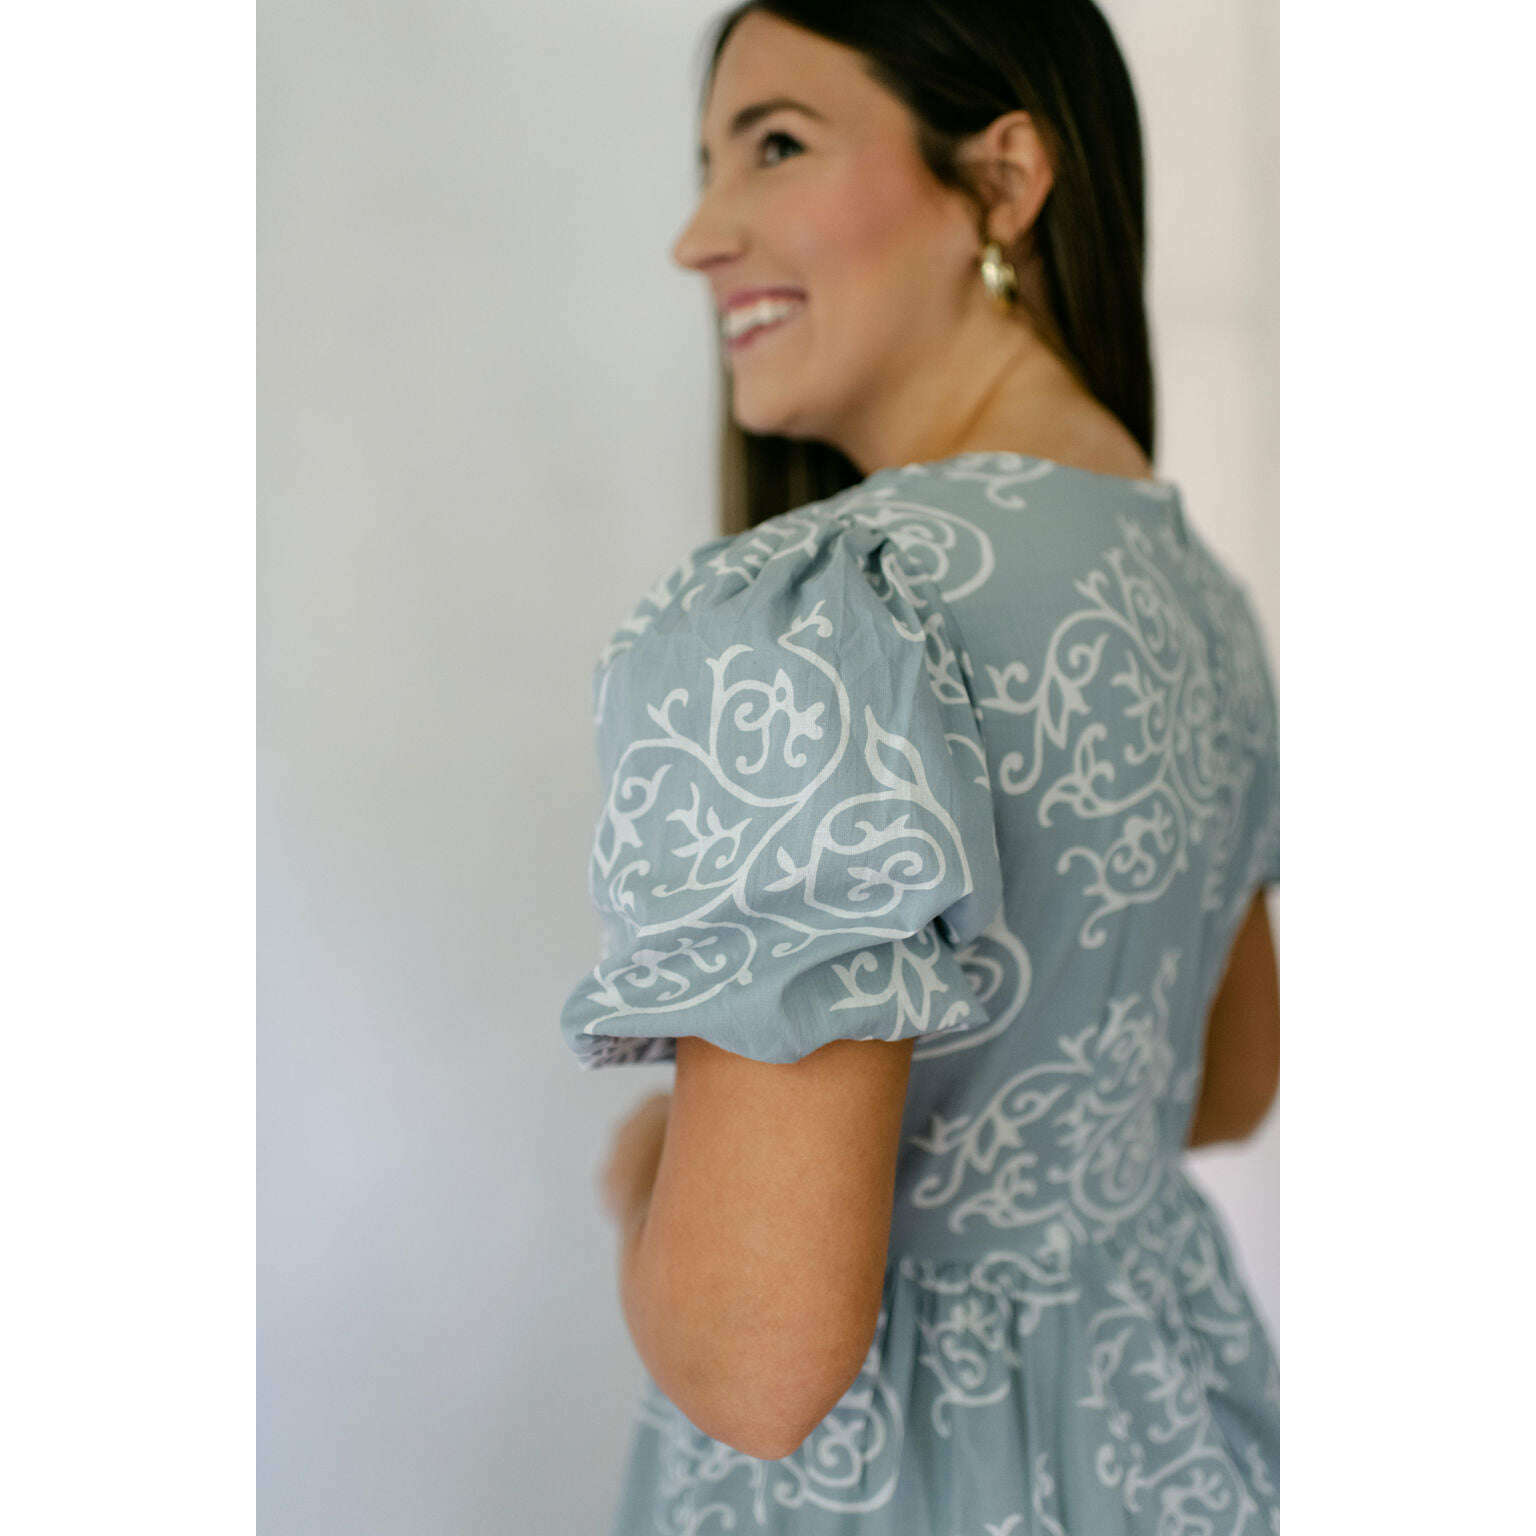 8.28 Boutique:Anna Cate Collection,Anna Cate Collection Sloan Dress in Dusty Fleur,Dress